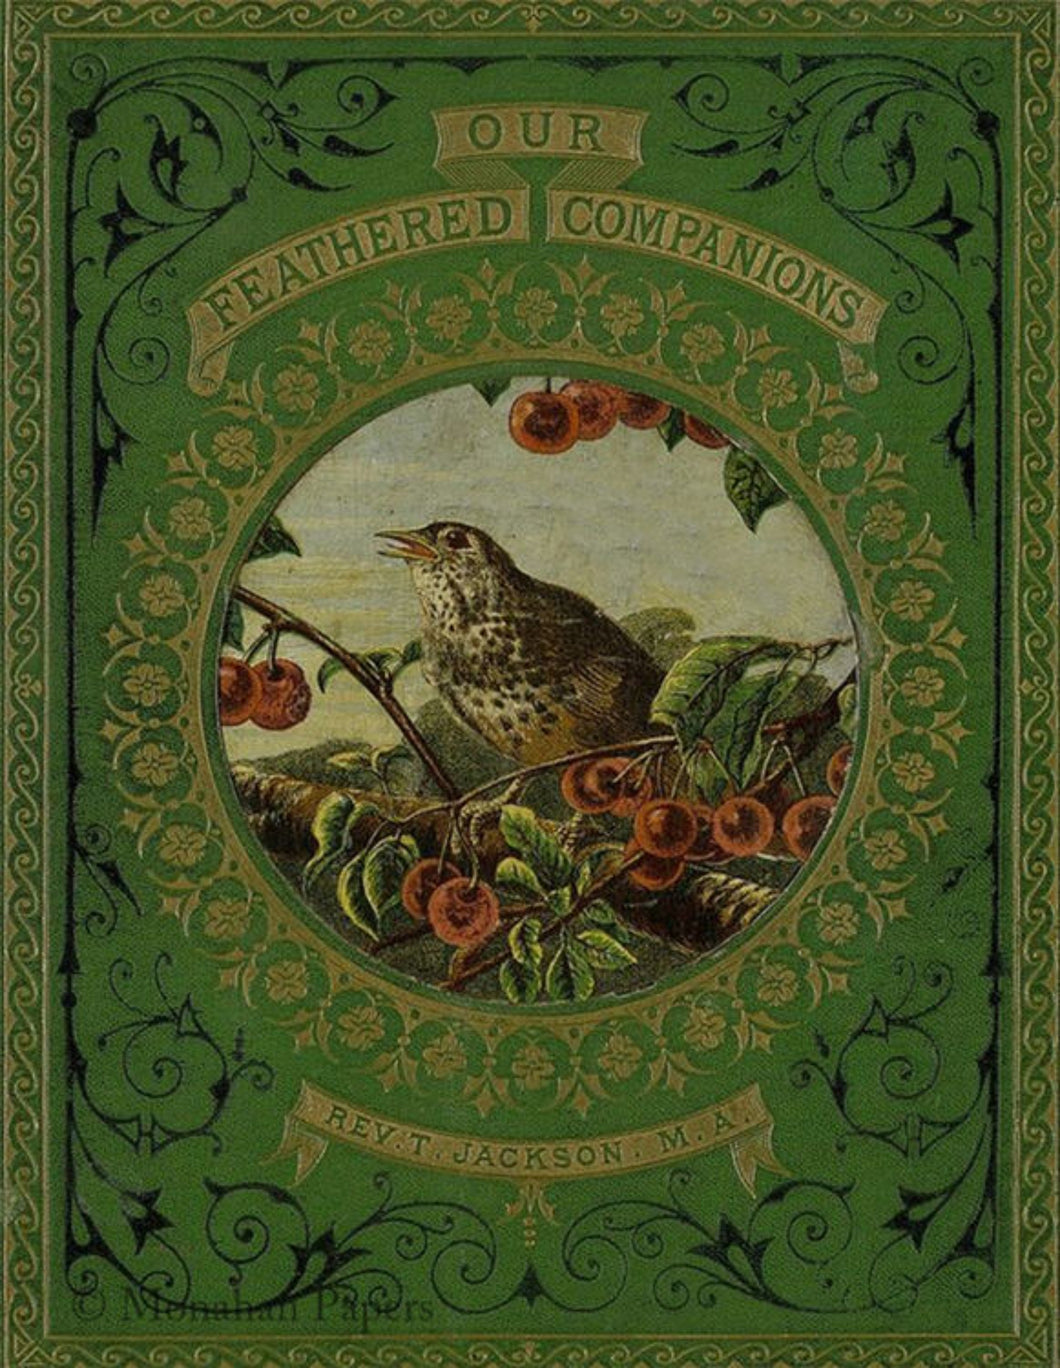 Our Feathered Companions Bird Book Cover by Monahan Papers, X184